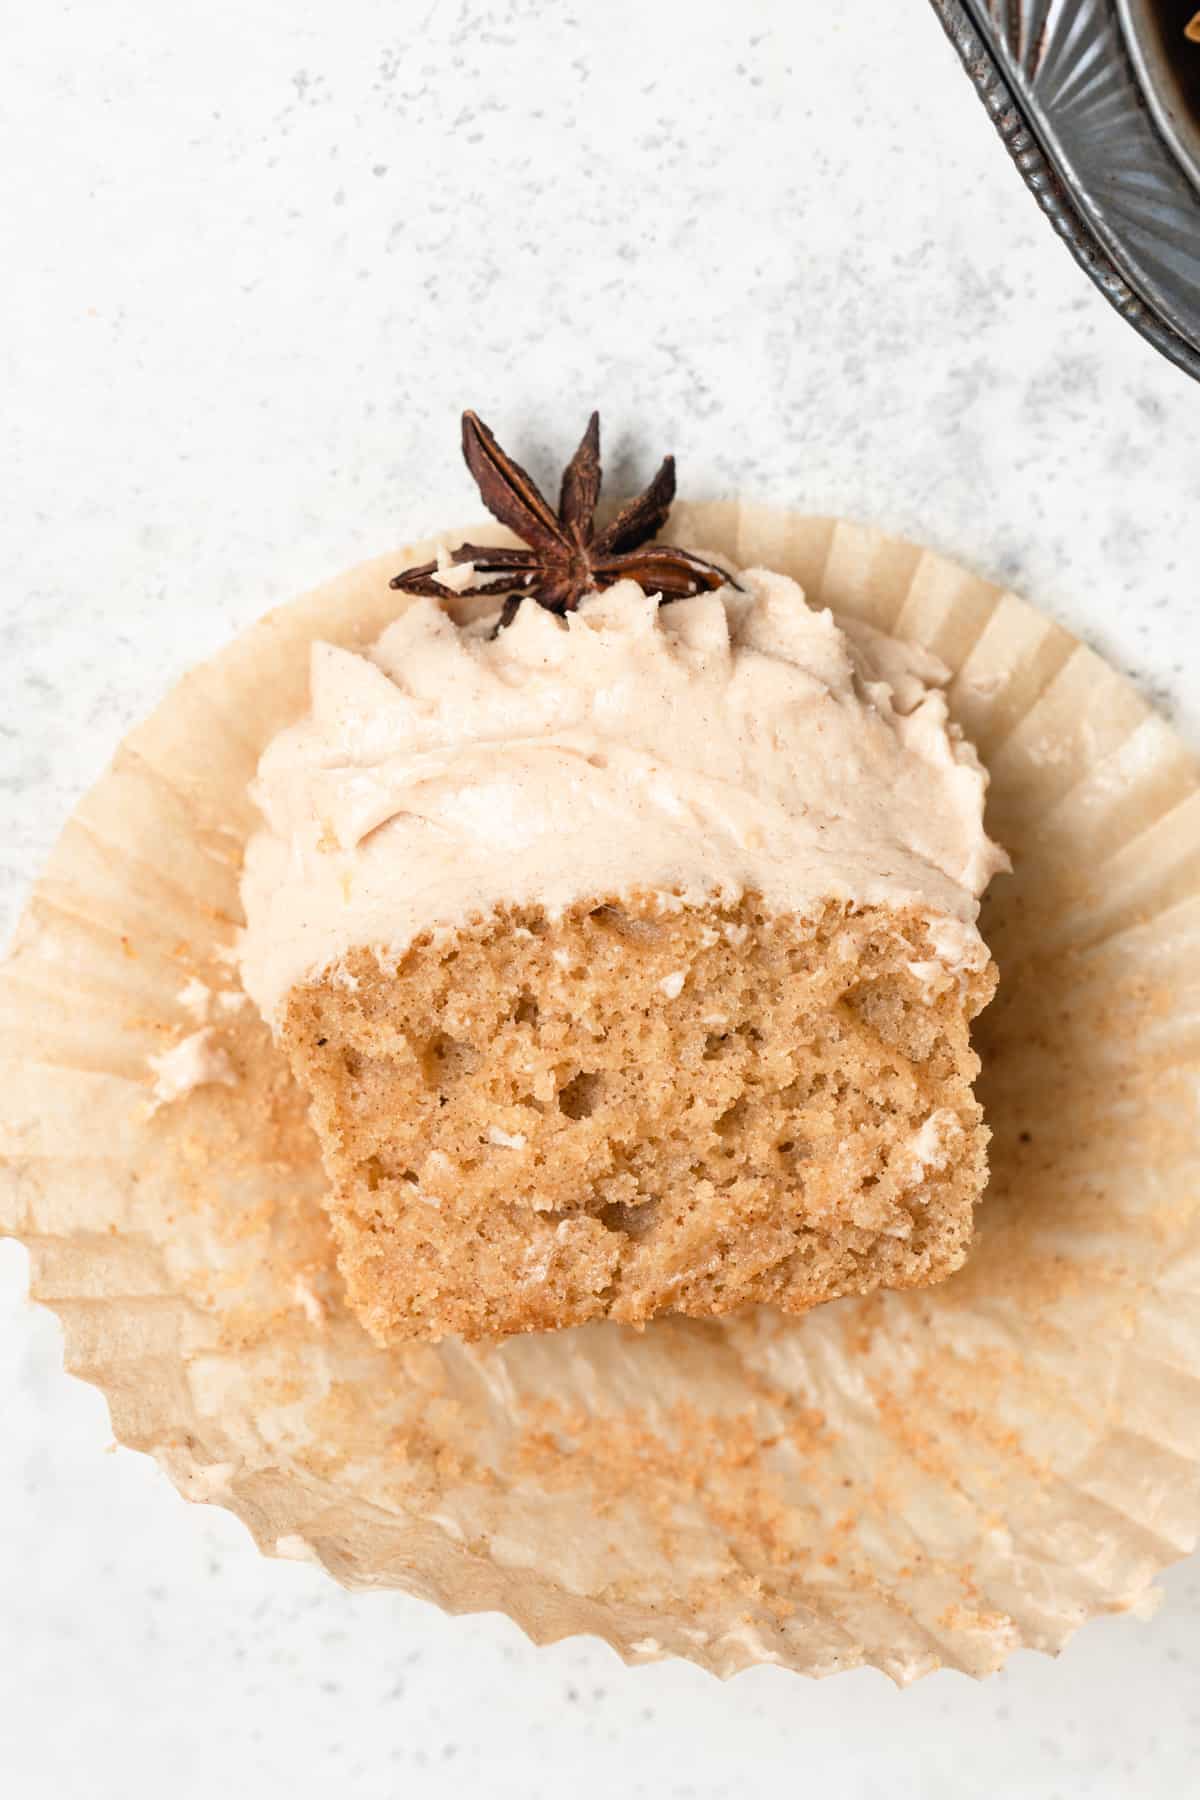 A cupcake topped with star anise cut in half to show texture.